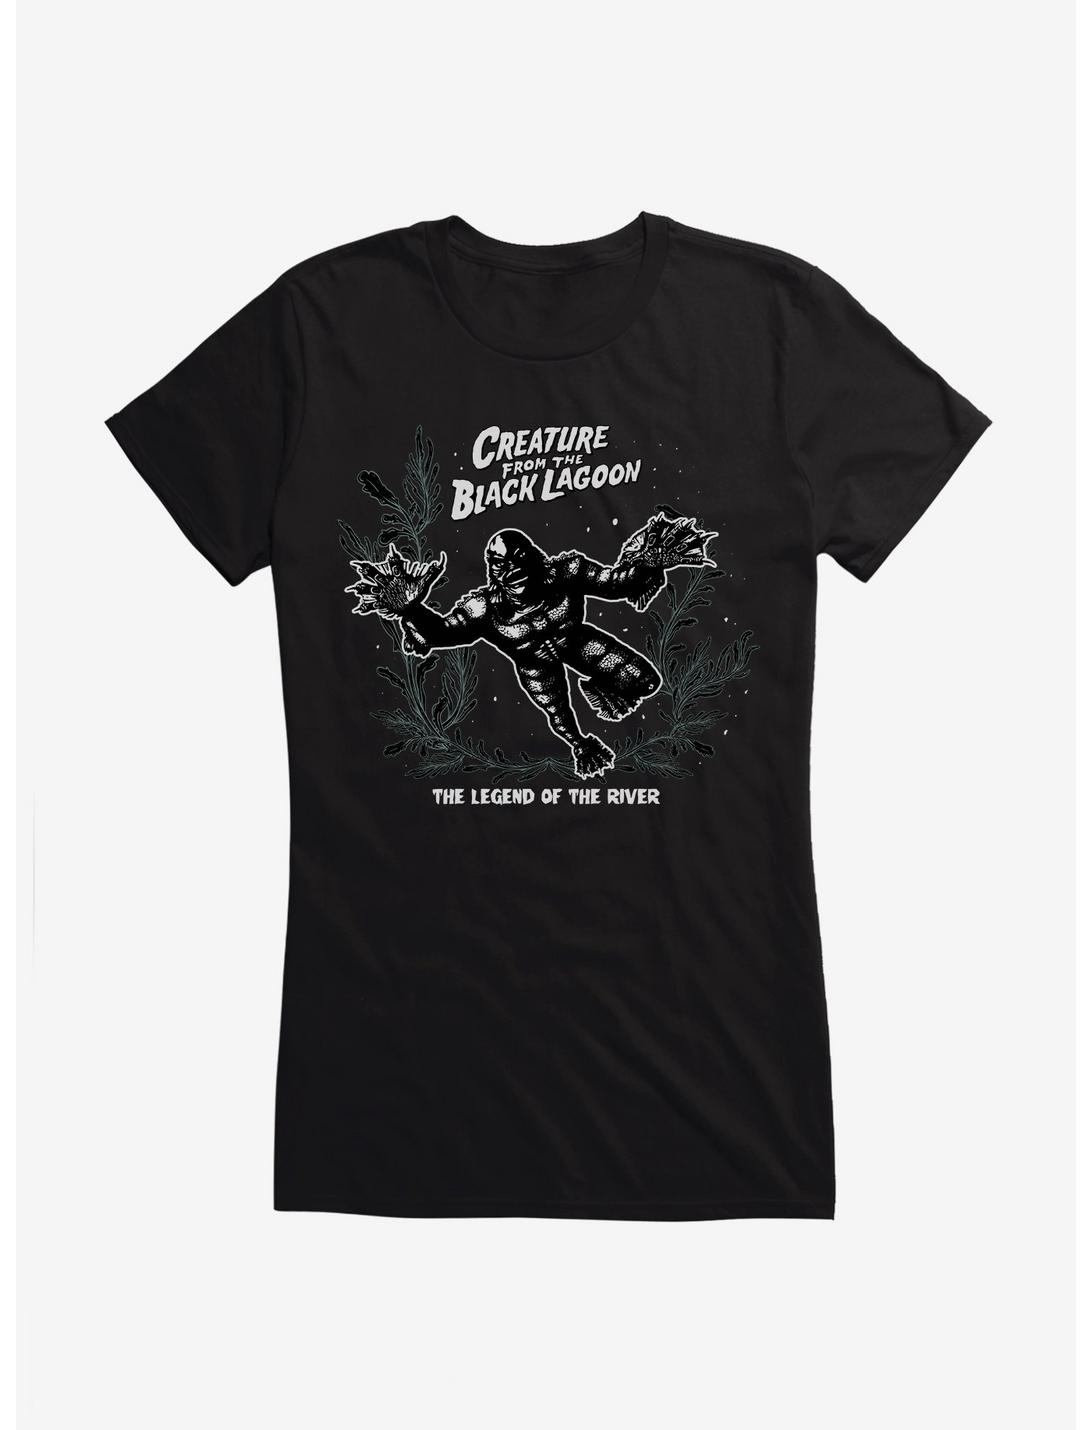 Creature From The Black Lagoon Legend Of The River Girls T-Shirt, BLACK, hi-res